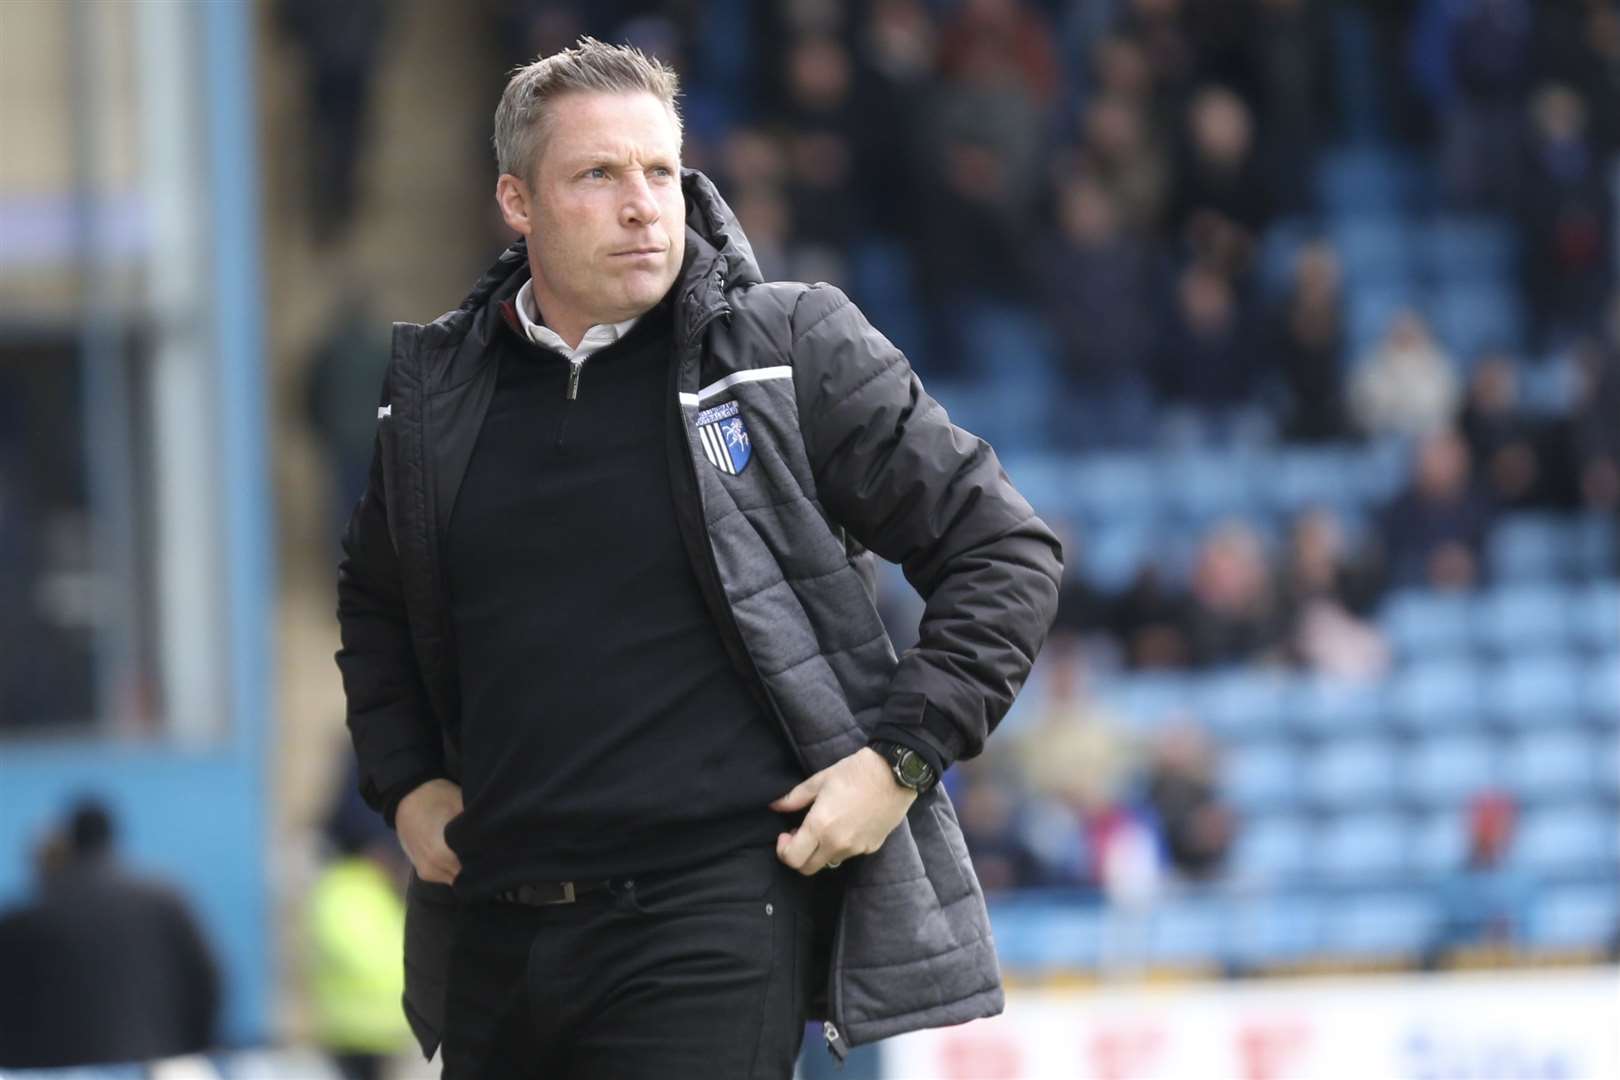 Gillingham manager Neil Harris is putting together a new-look team